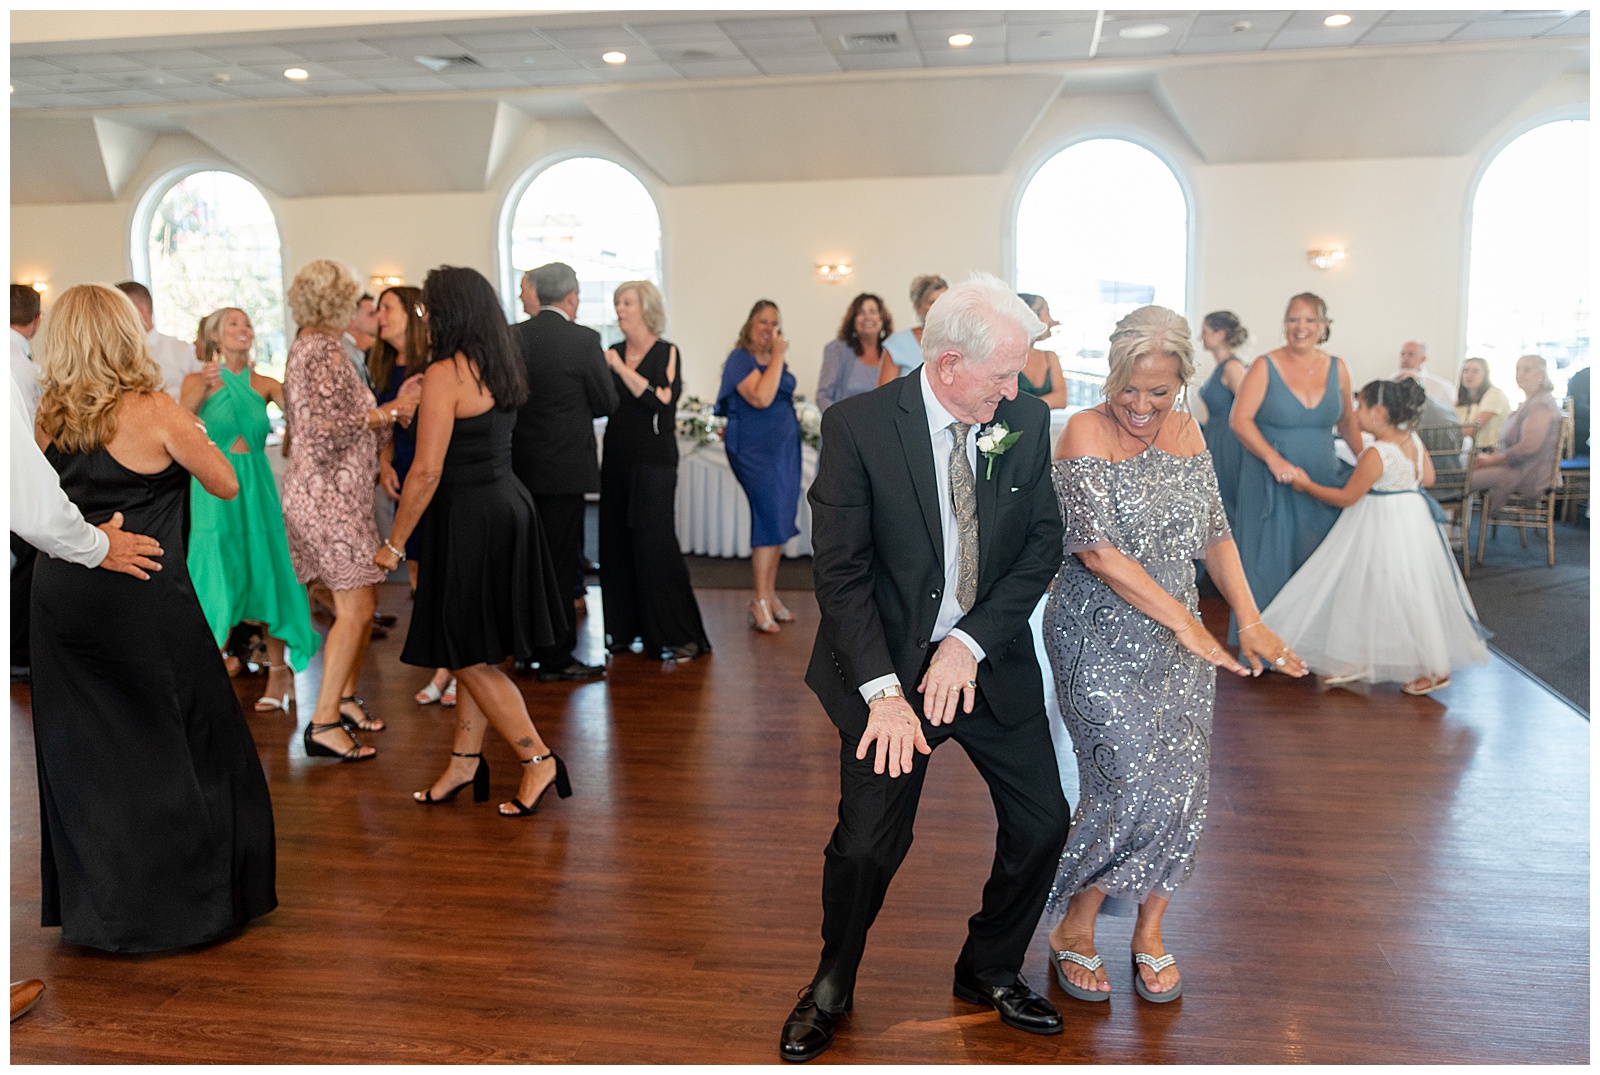 guests dancing and having fun during wedding reception at the bayview house at captain bill's in bay shore new york